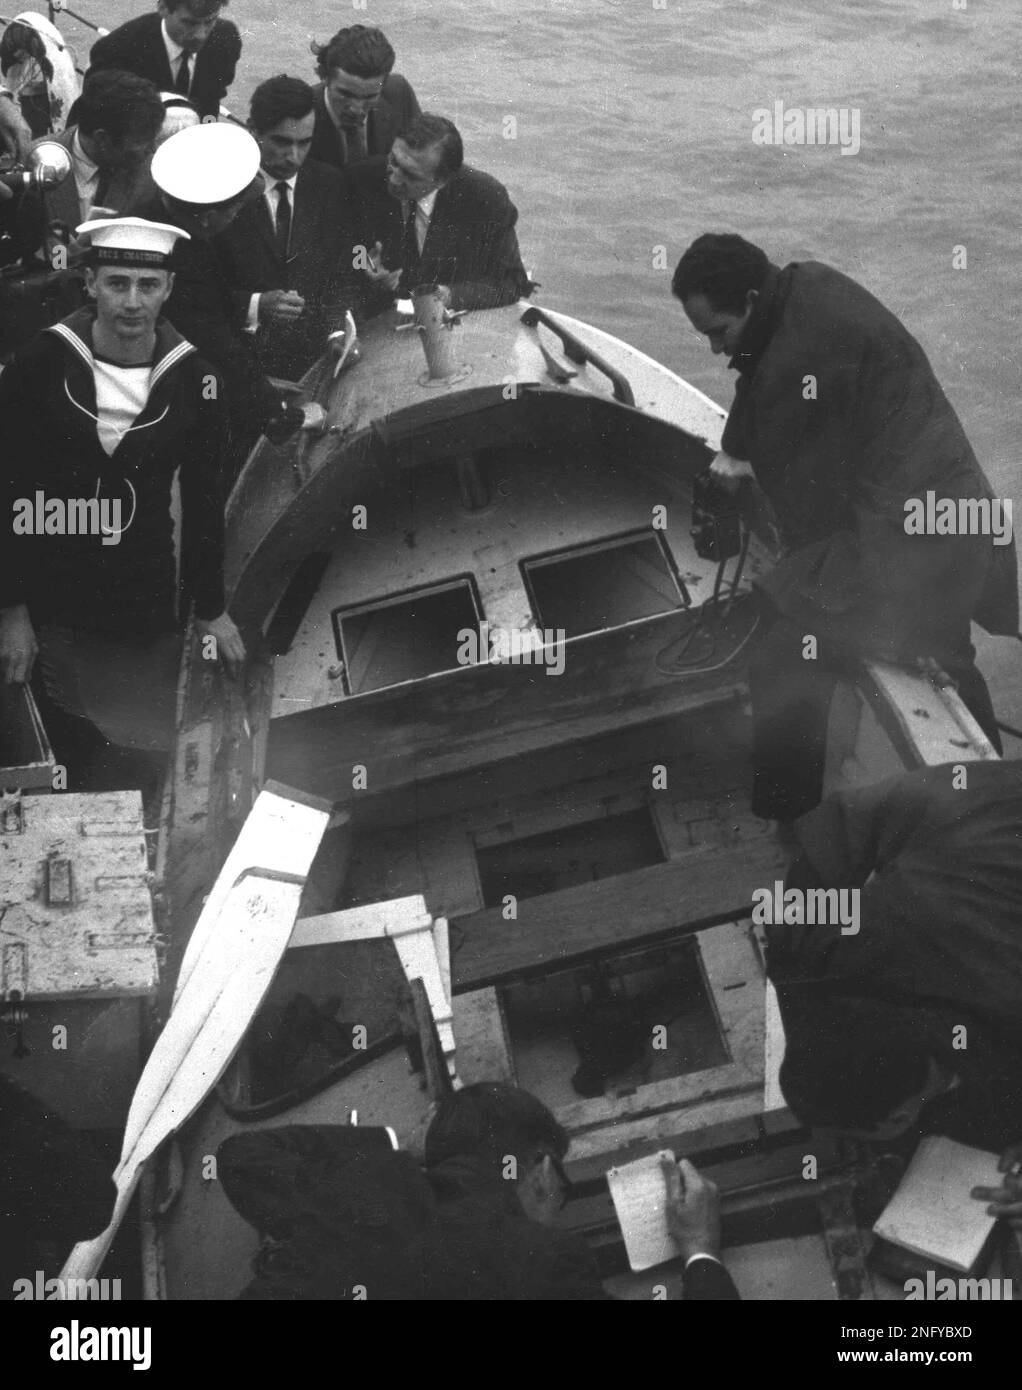 Newsmen and photographers surround Puffin, the boat in which David  Johnstone and John Hoare attempted to row across the Atlantic Ocean. HMCS  Chaudière found the floating vessel with no signs of life